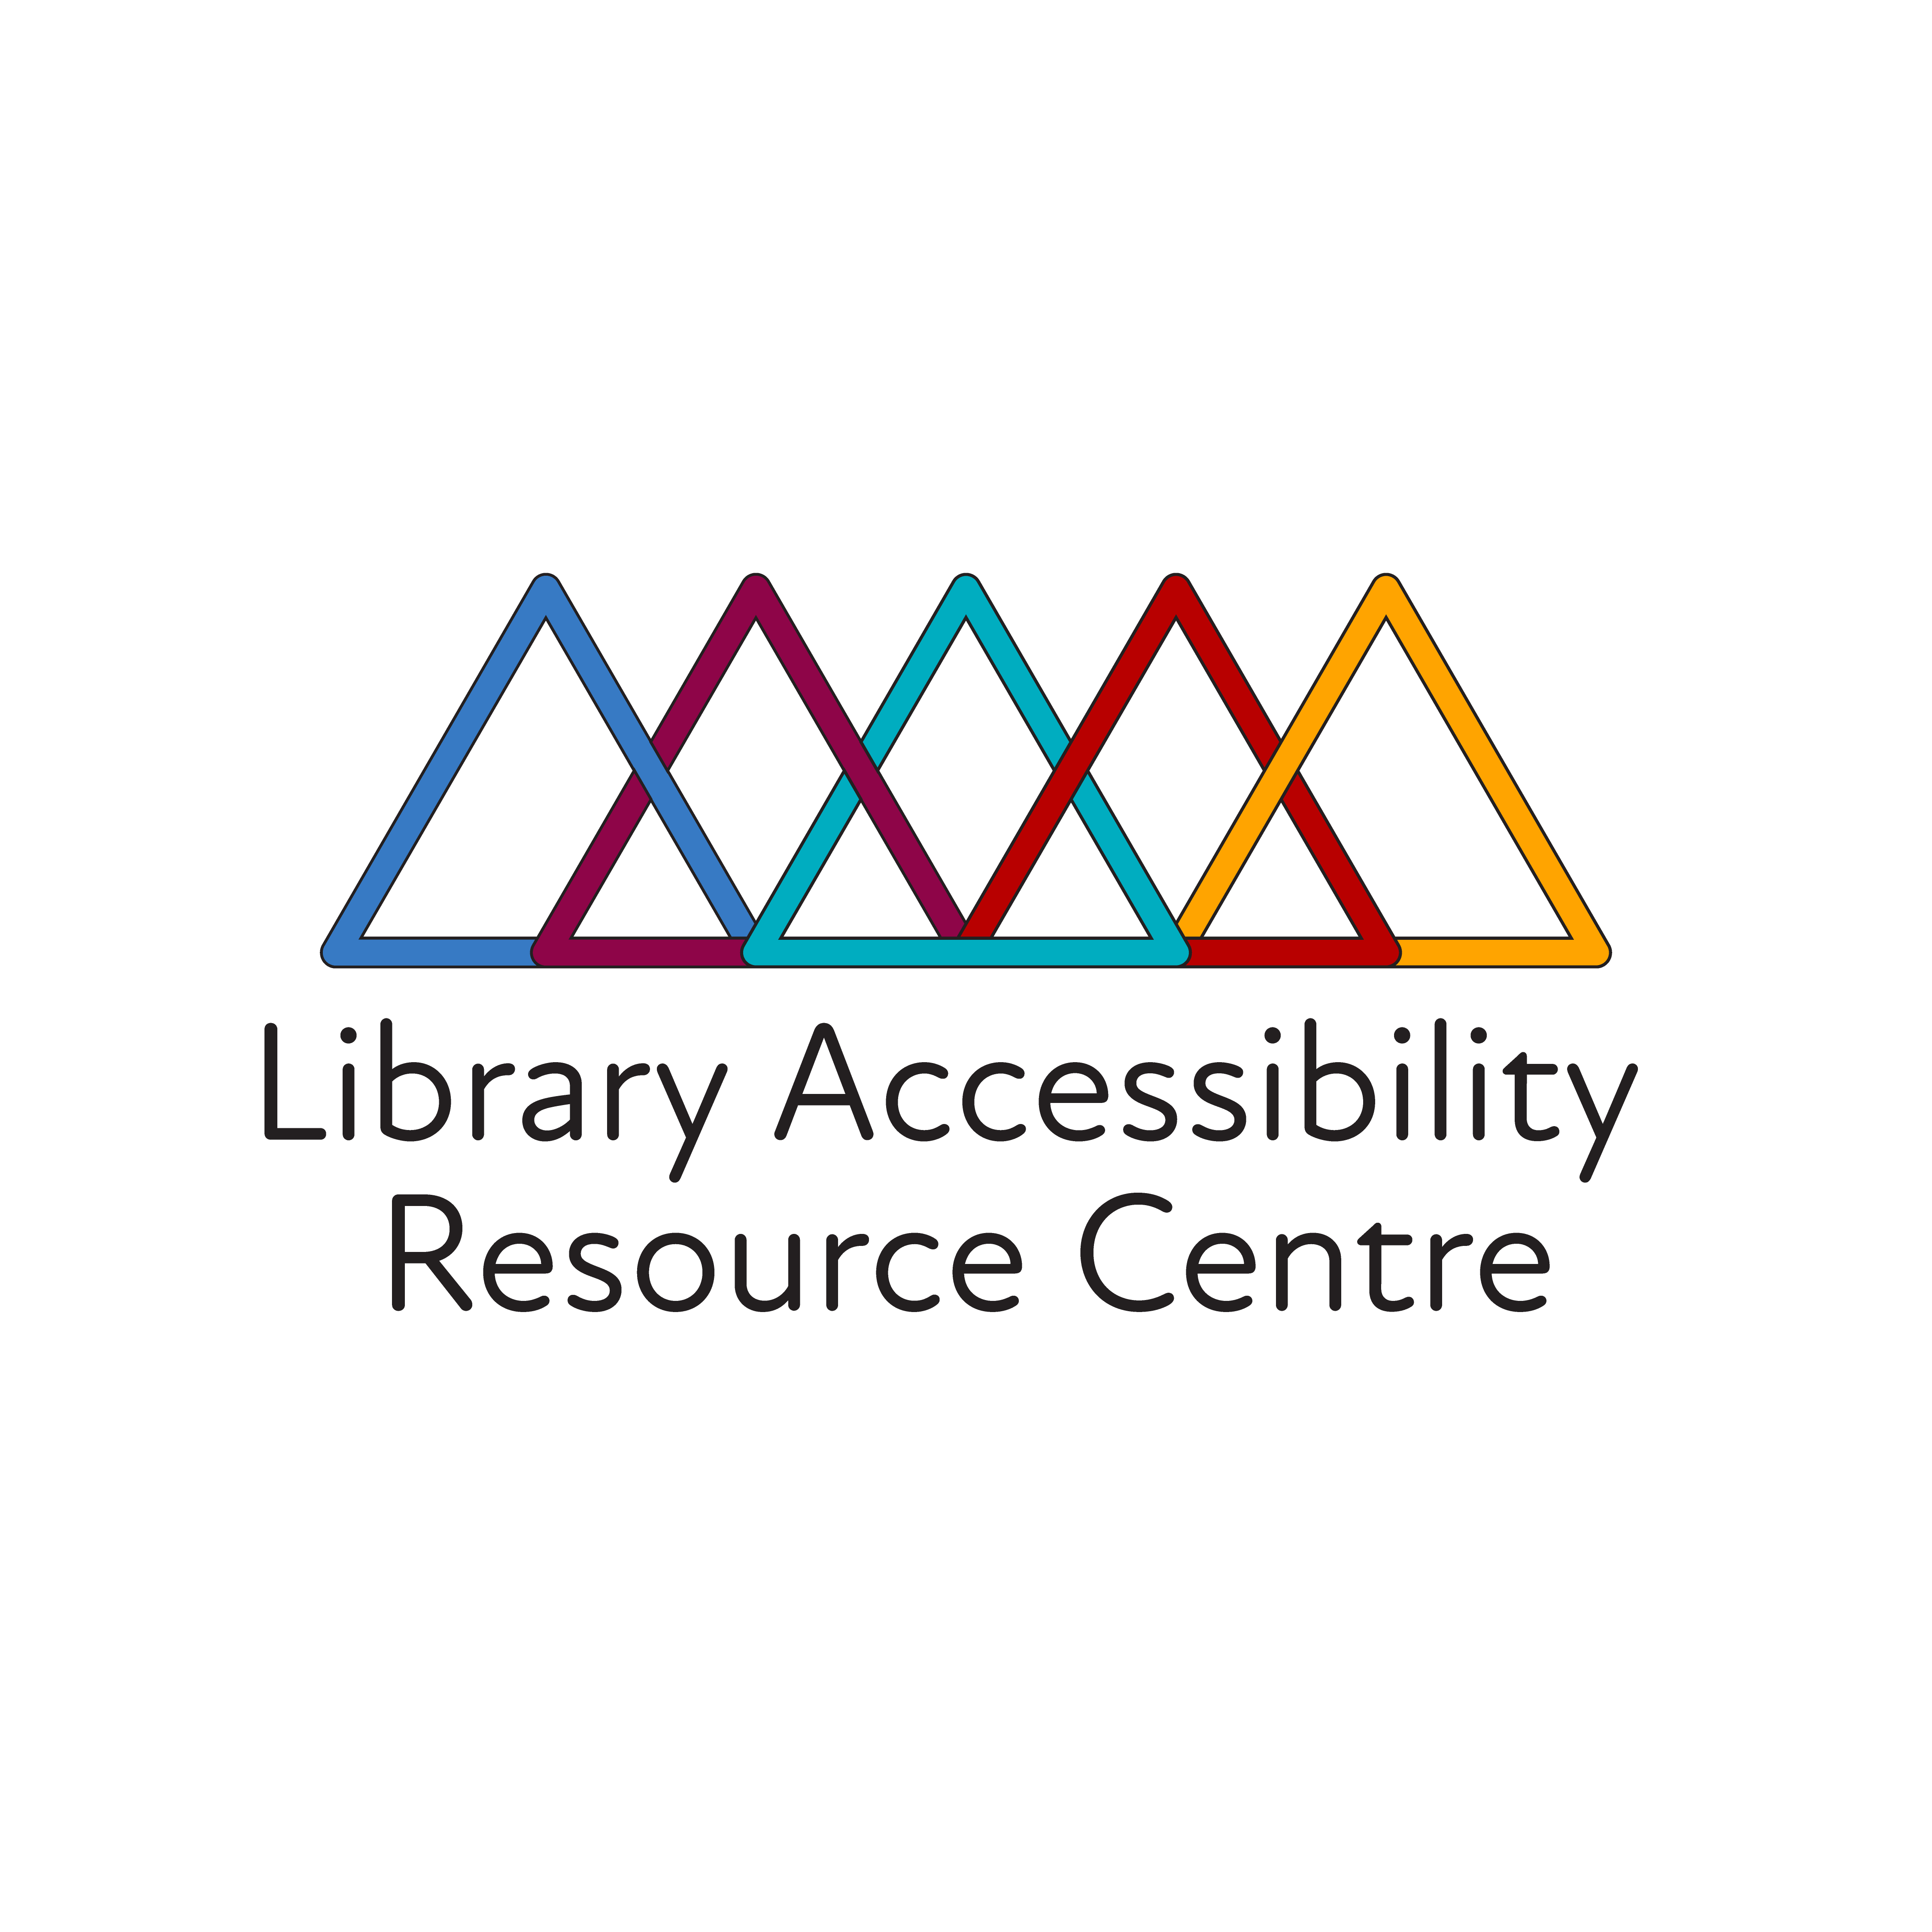 Connected differing coloured mountainous triangles: blue, purple, teal, red, and yellow each representing a disability. The text Library Accessibility Resource Centre is below the triangles.